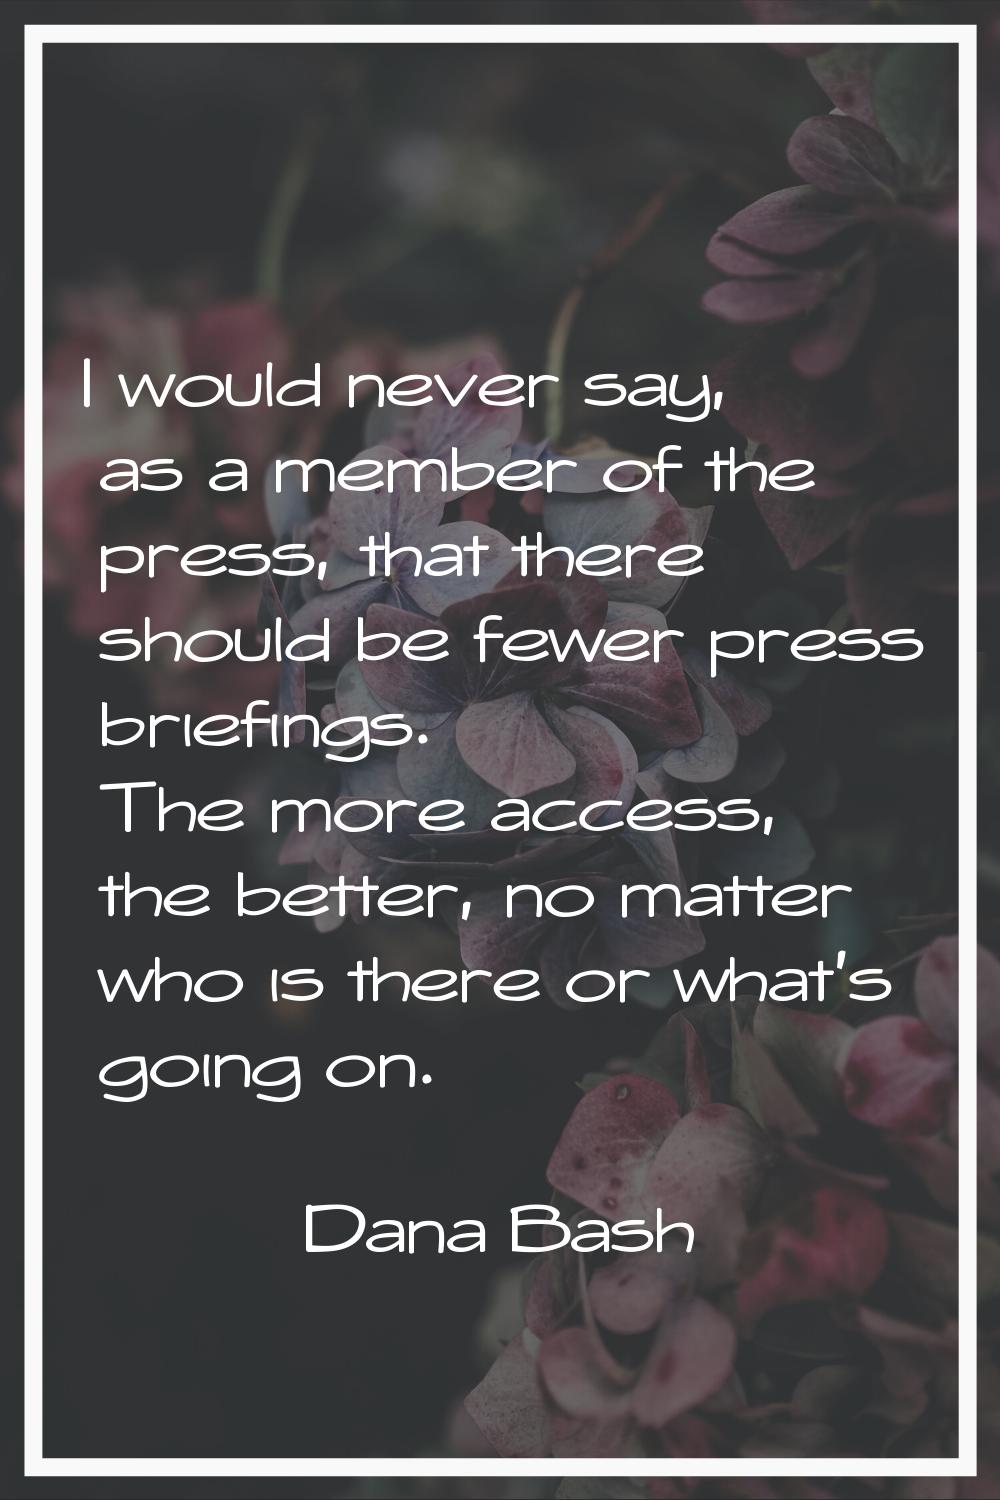 I would never say, as a member of the press, that there should be fewer press briefings. The more a